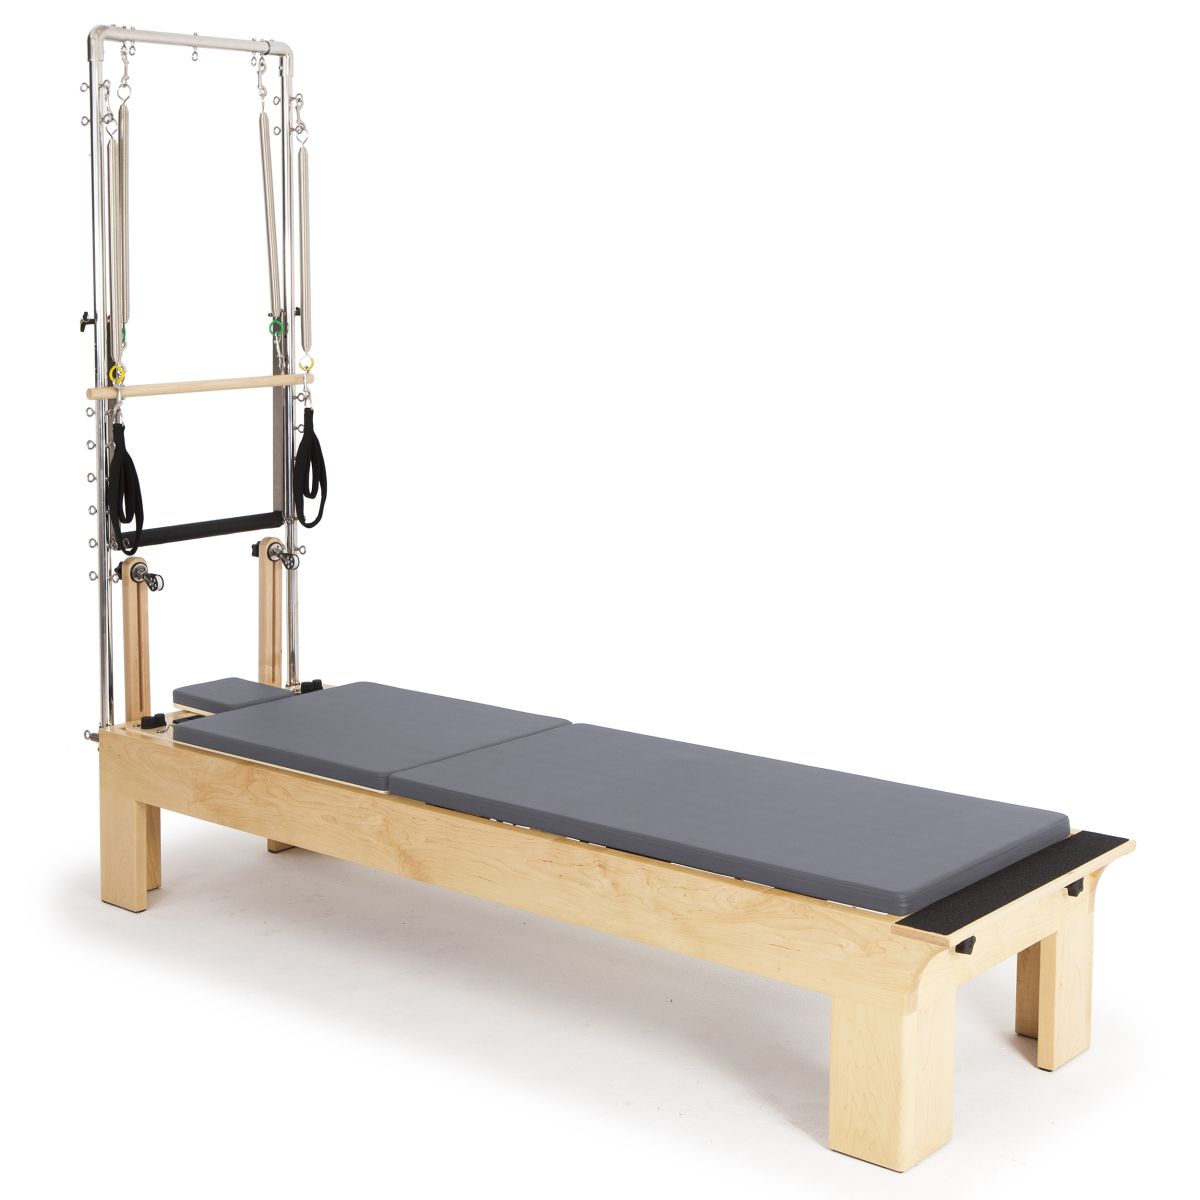 Pilates Soft Core bed Pulley tower Gyroscope Pilates reformer machine  Fitness Equipment Spinal correction Yoga Gym Profession